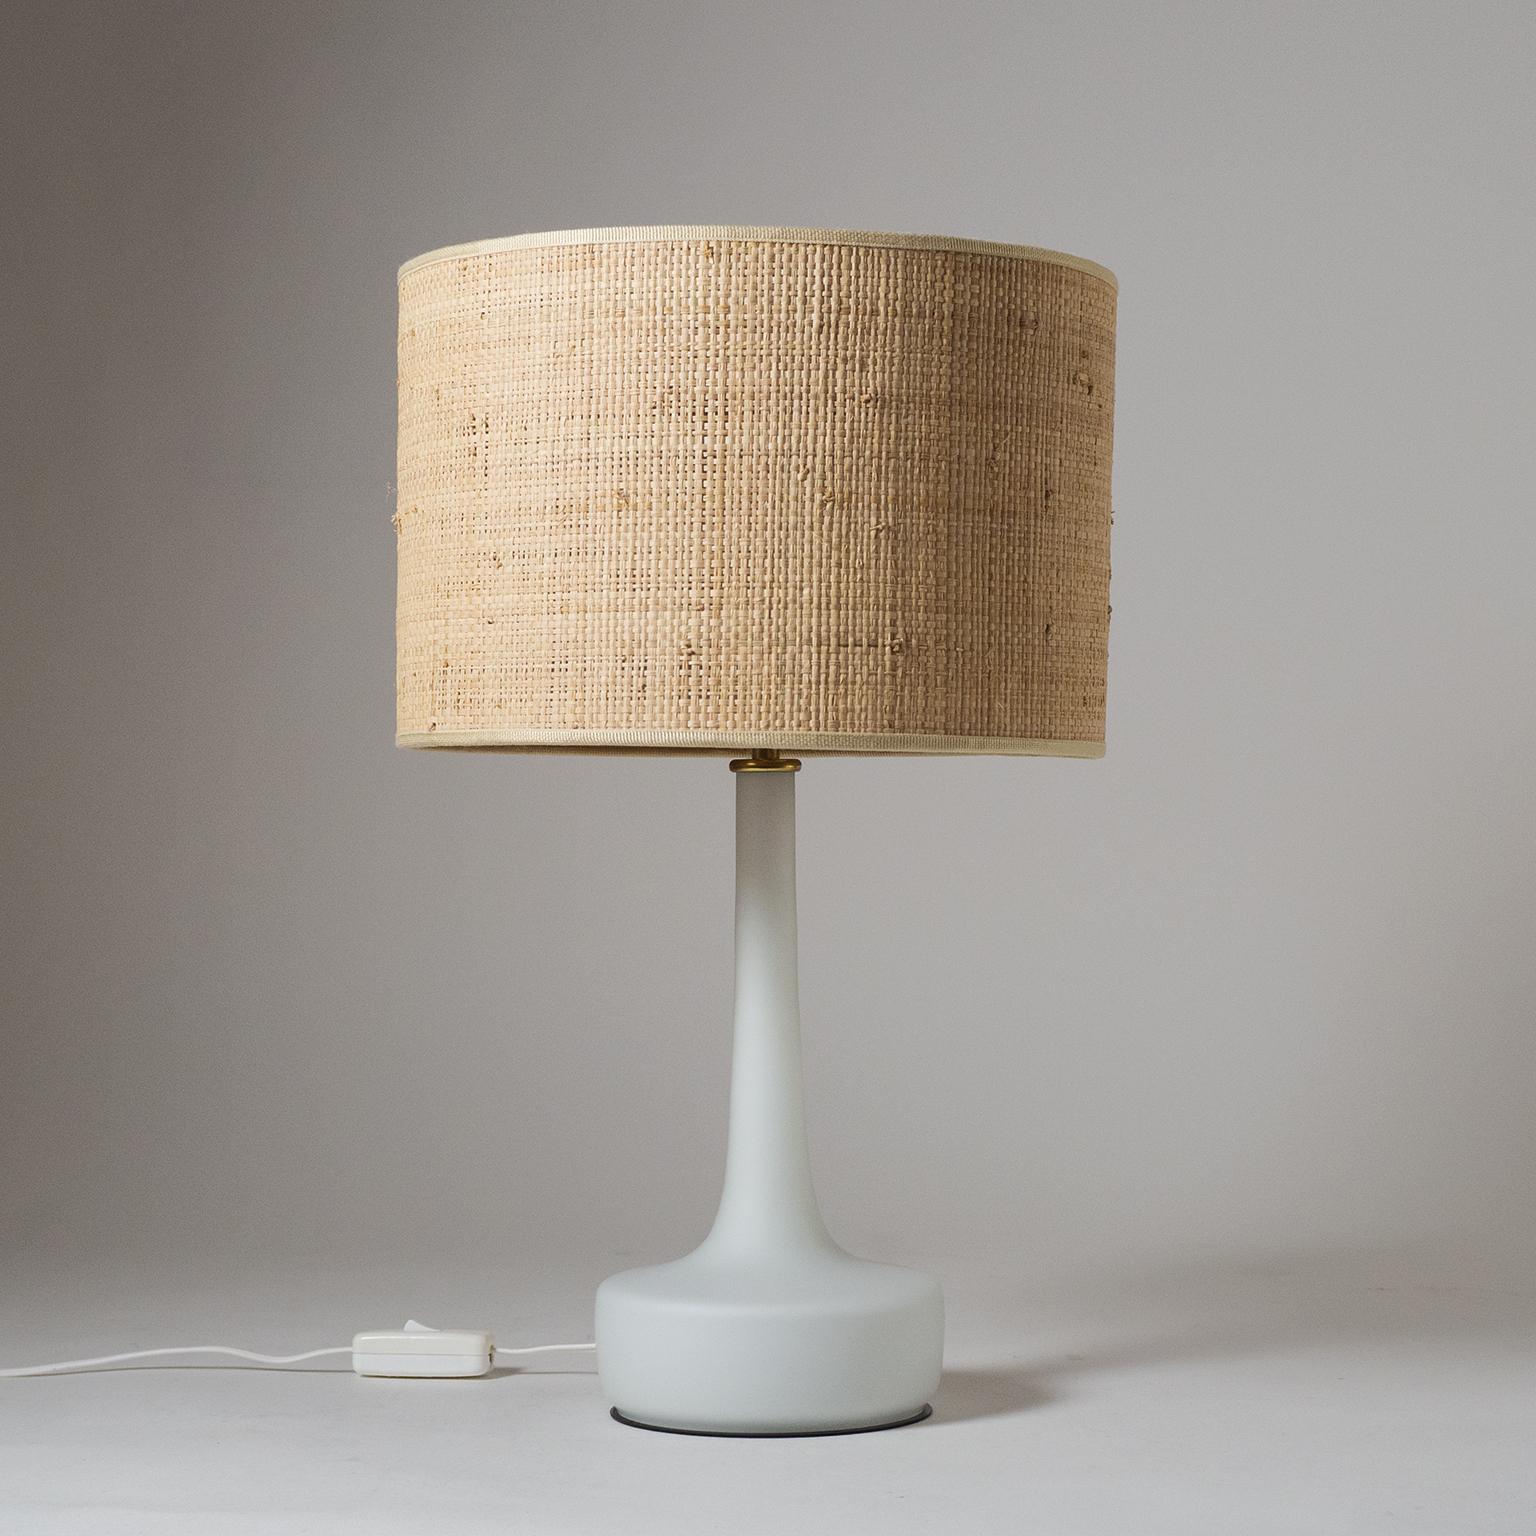 Pair of Austrian table lamps from the 1960s. Blown glass base with a white inner casing and satin finish on the outside and a large raffia shade with brass details. Two original brass E27 sockets.